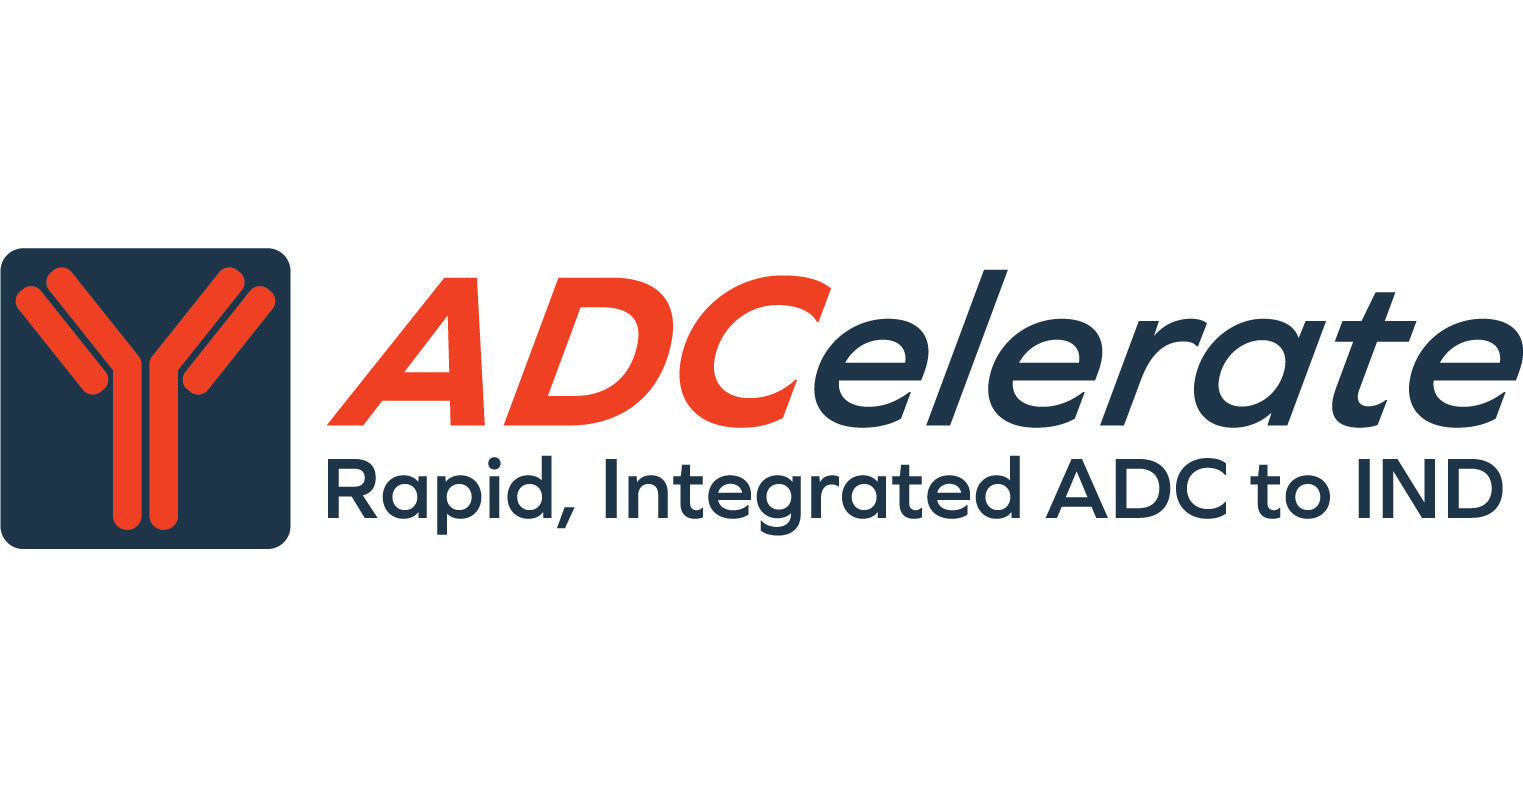 Piramal Pharma Solutions Launches ADCelerate, a Rapid, Integrated Approach to Taking ADCs to IND